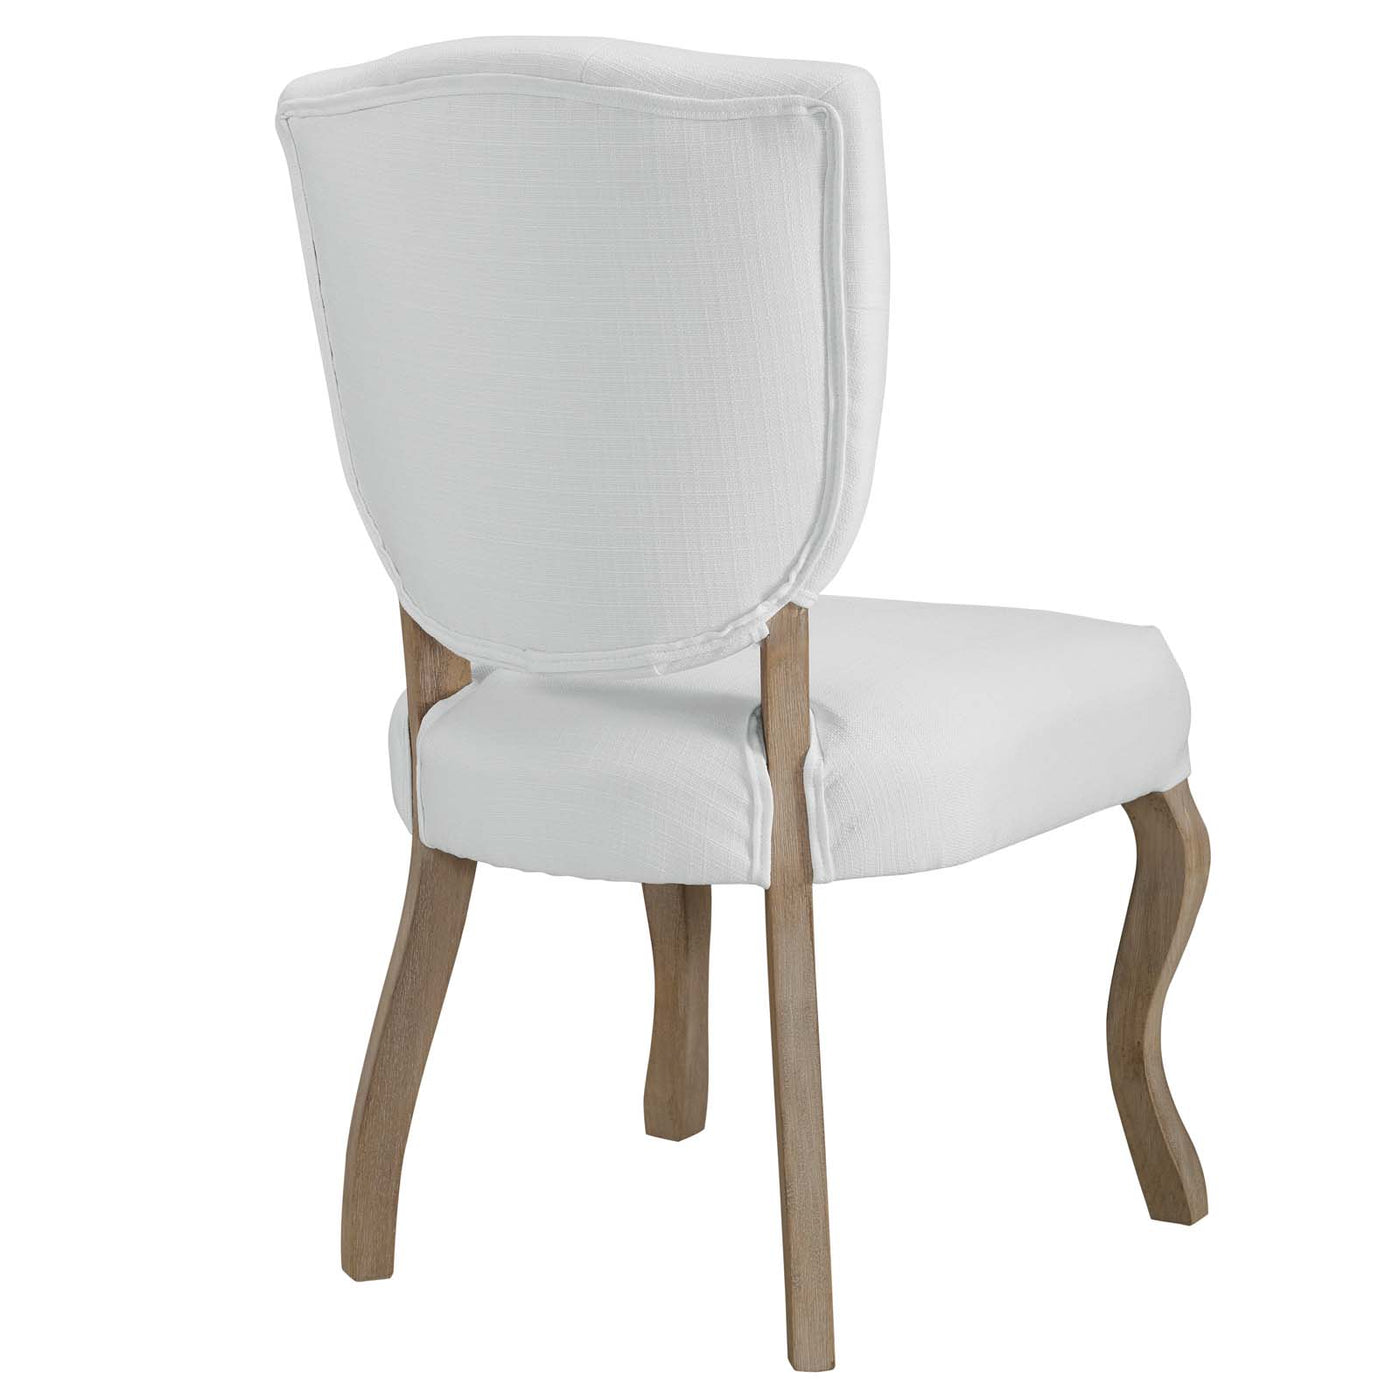 Array Vintage French Upholstered Dining Side Chair